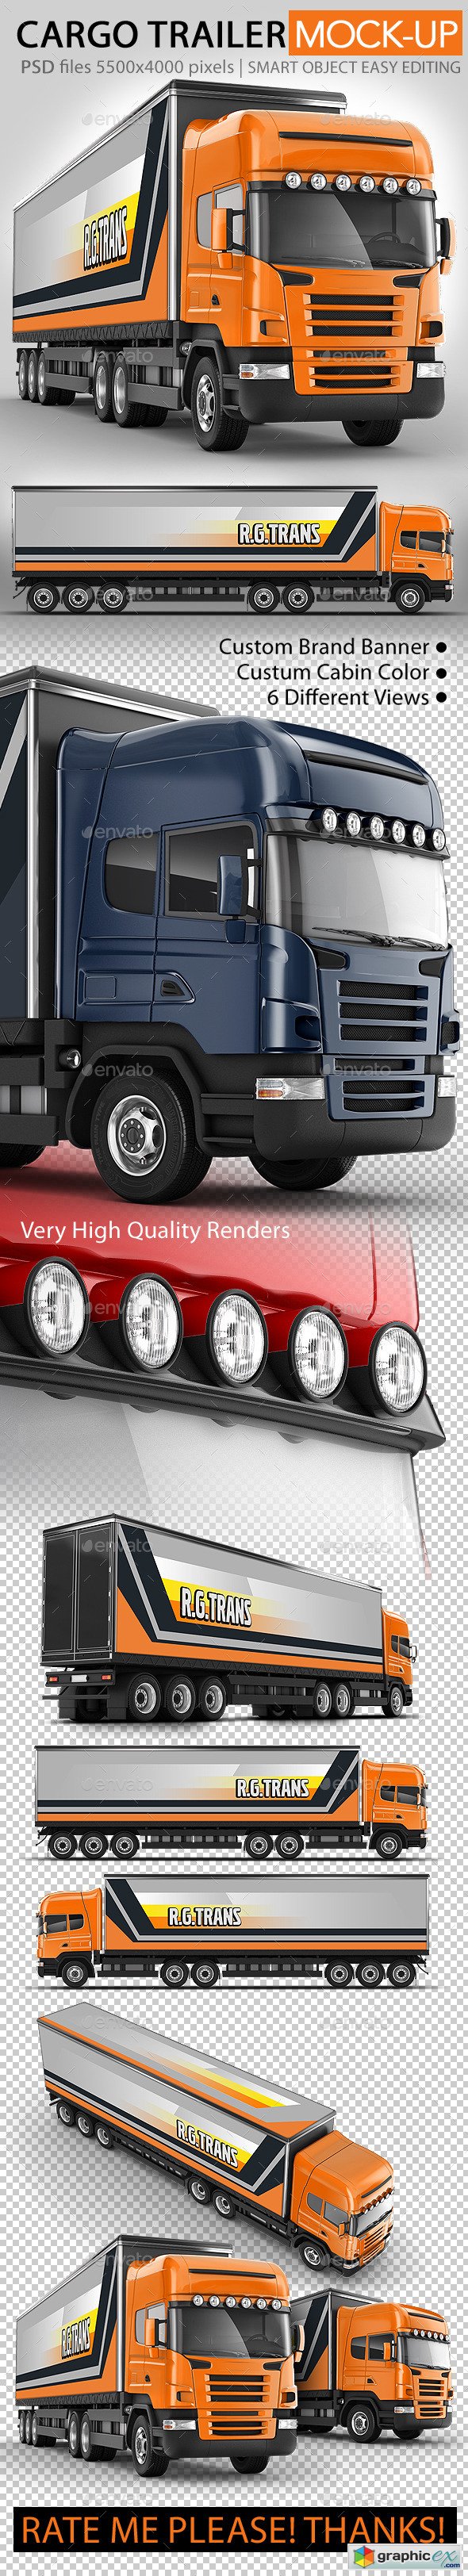 Download Road train, Trailer Truck mock-up » Free Download Vector Stock Image Photoshop Icon